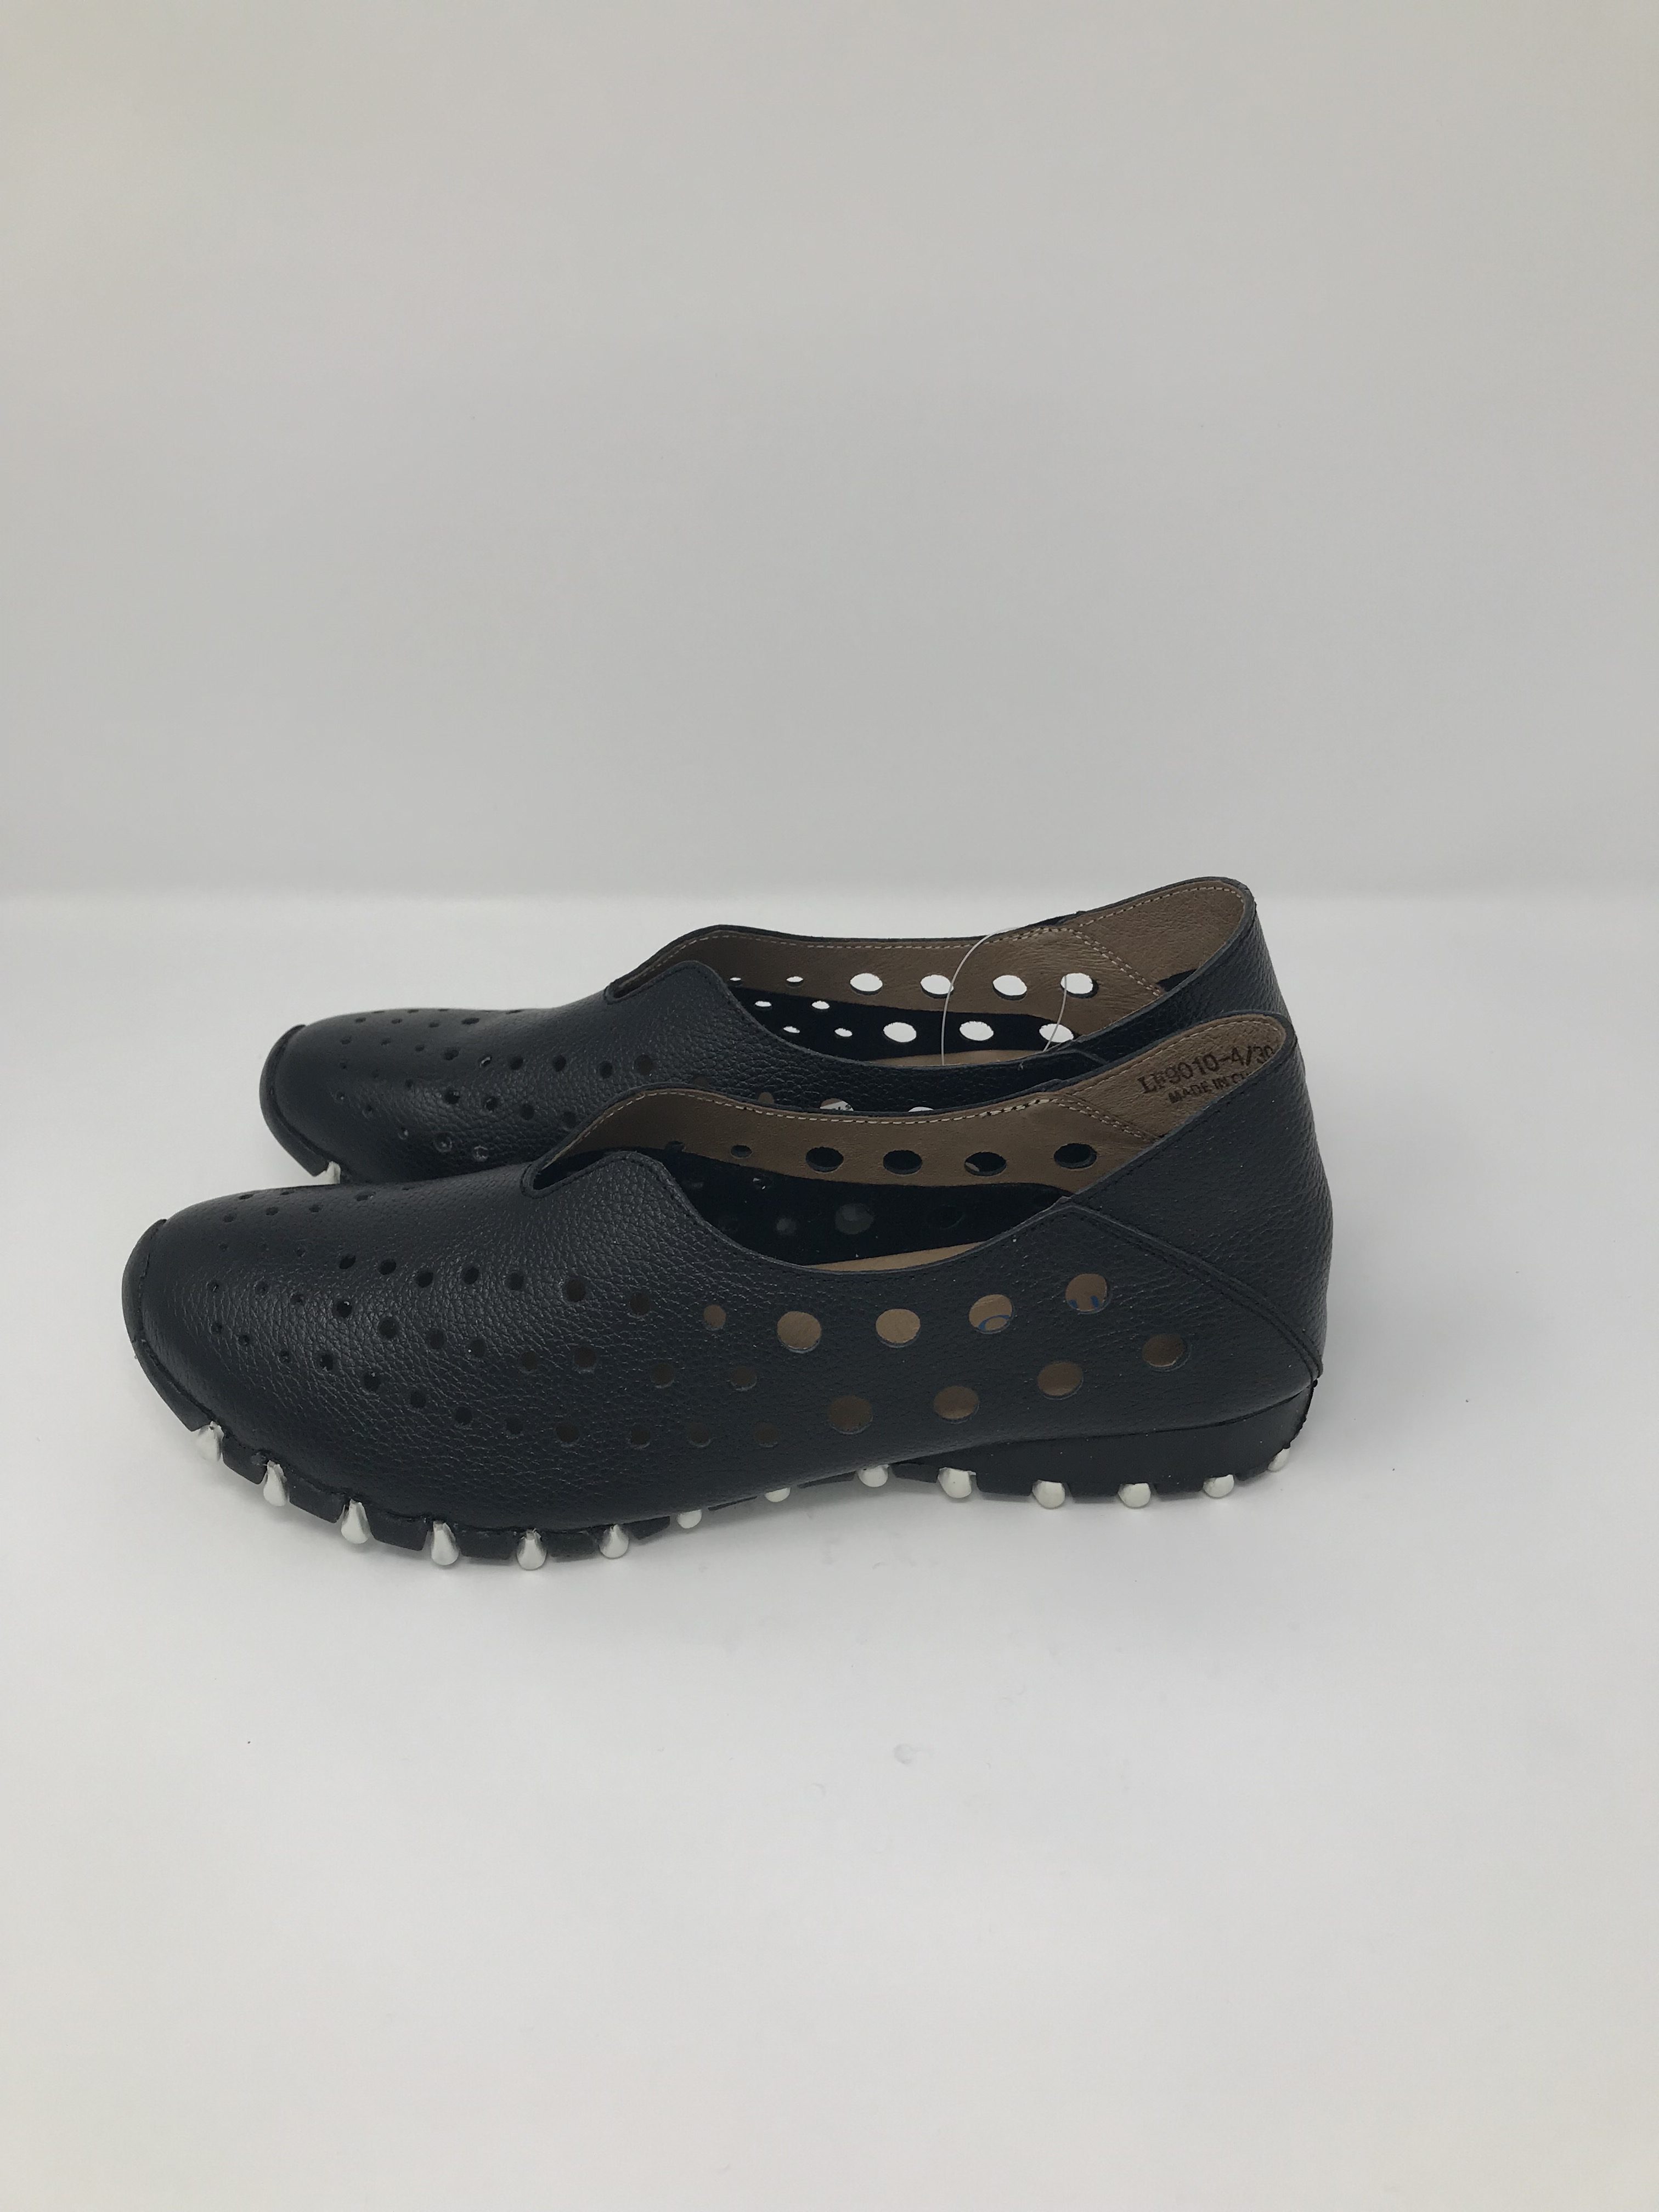 litfoot slip on shoes